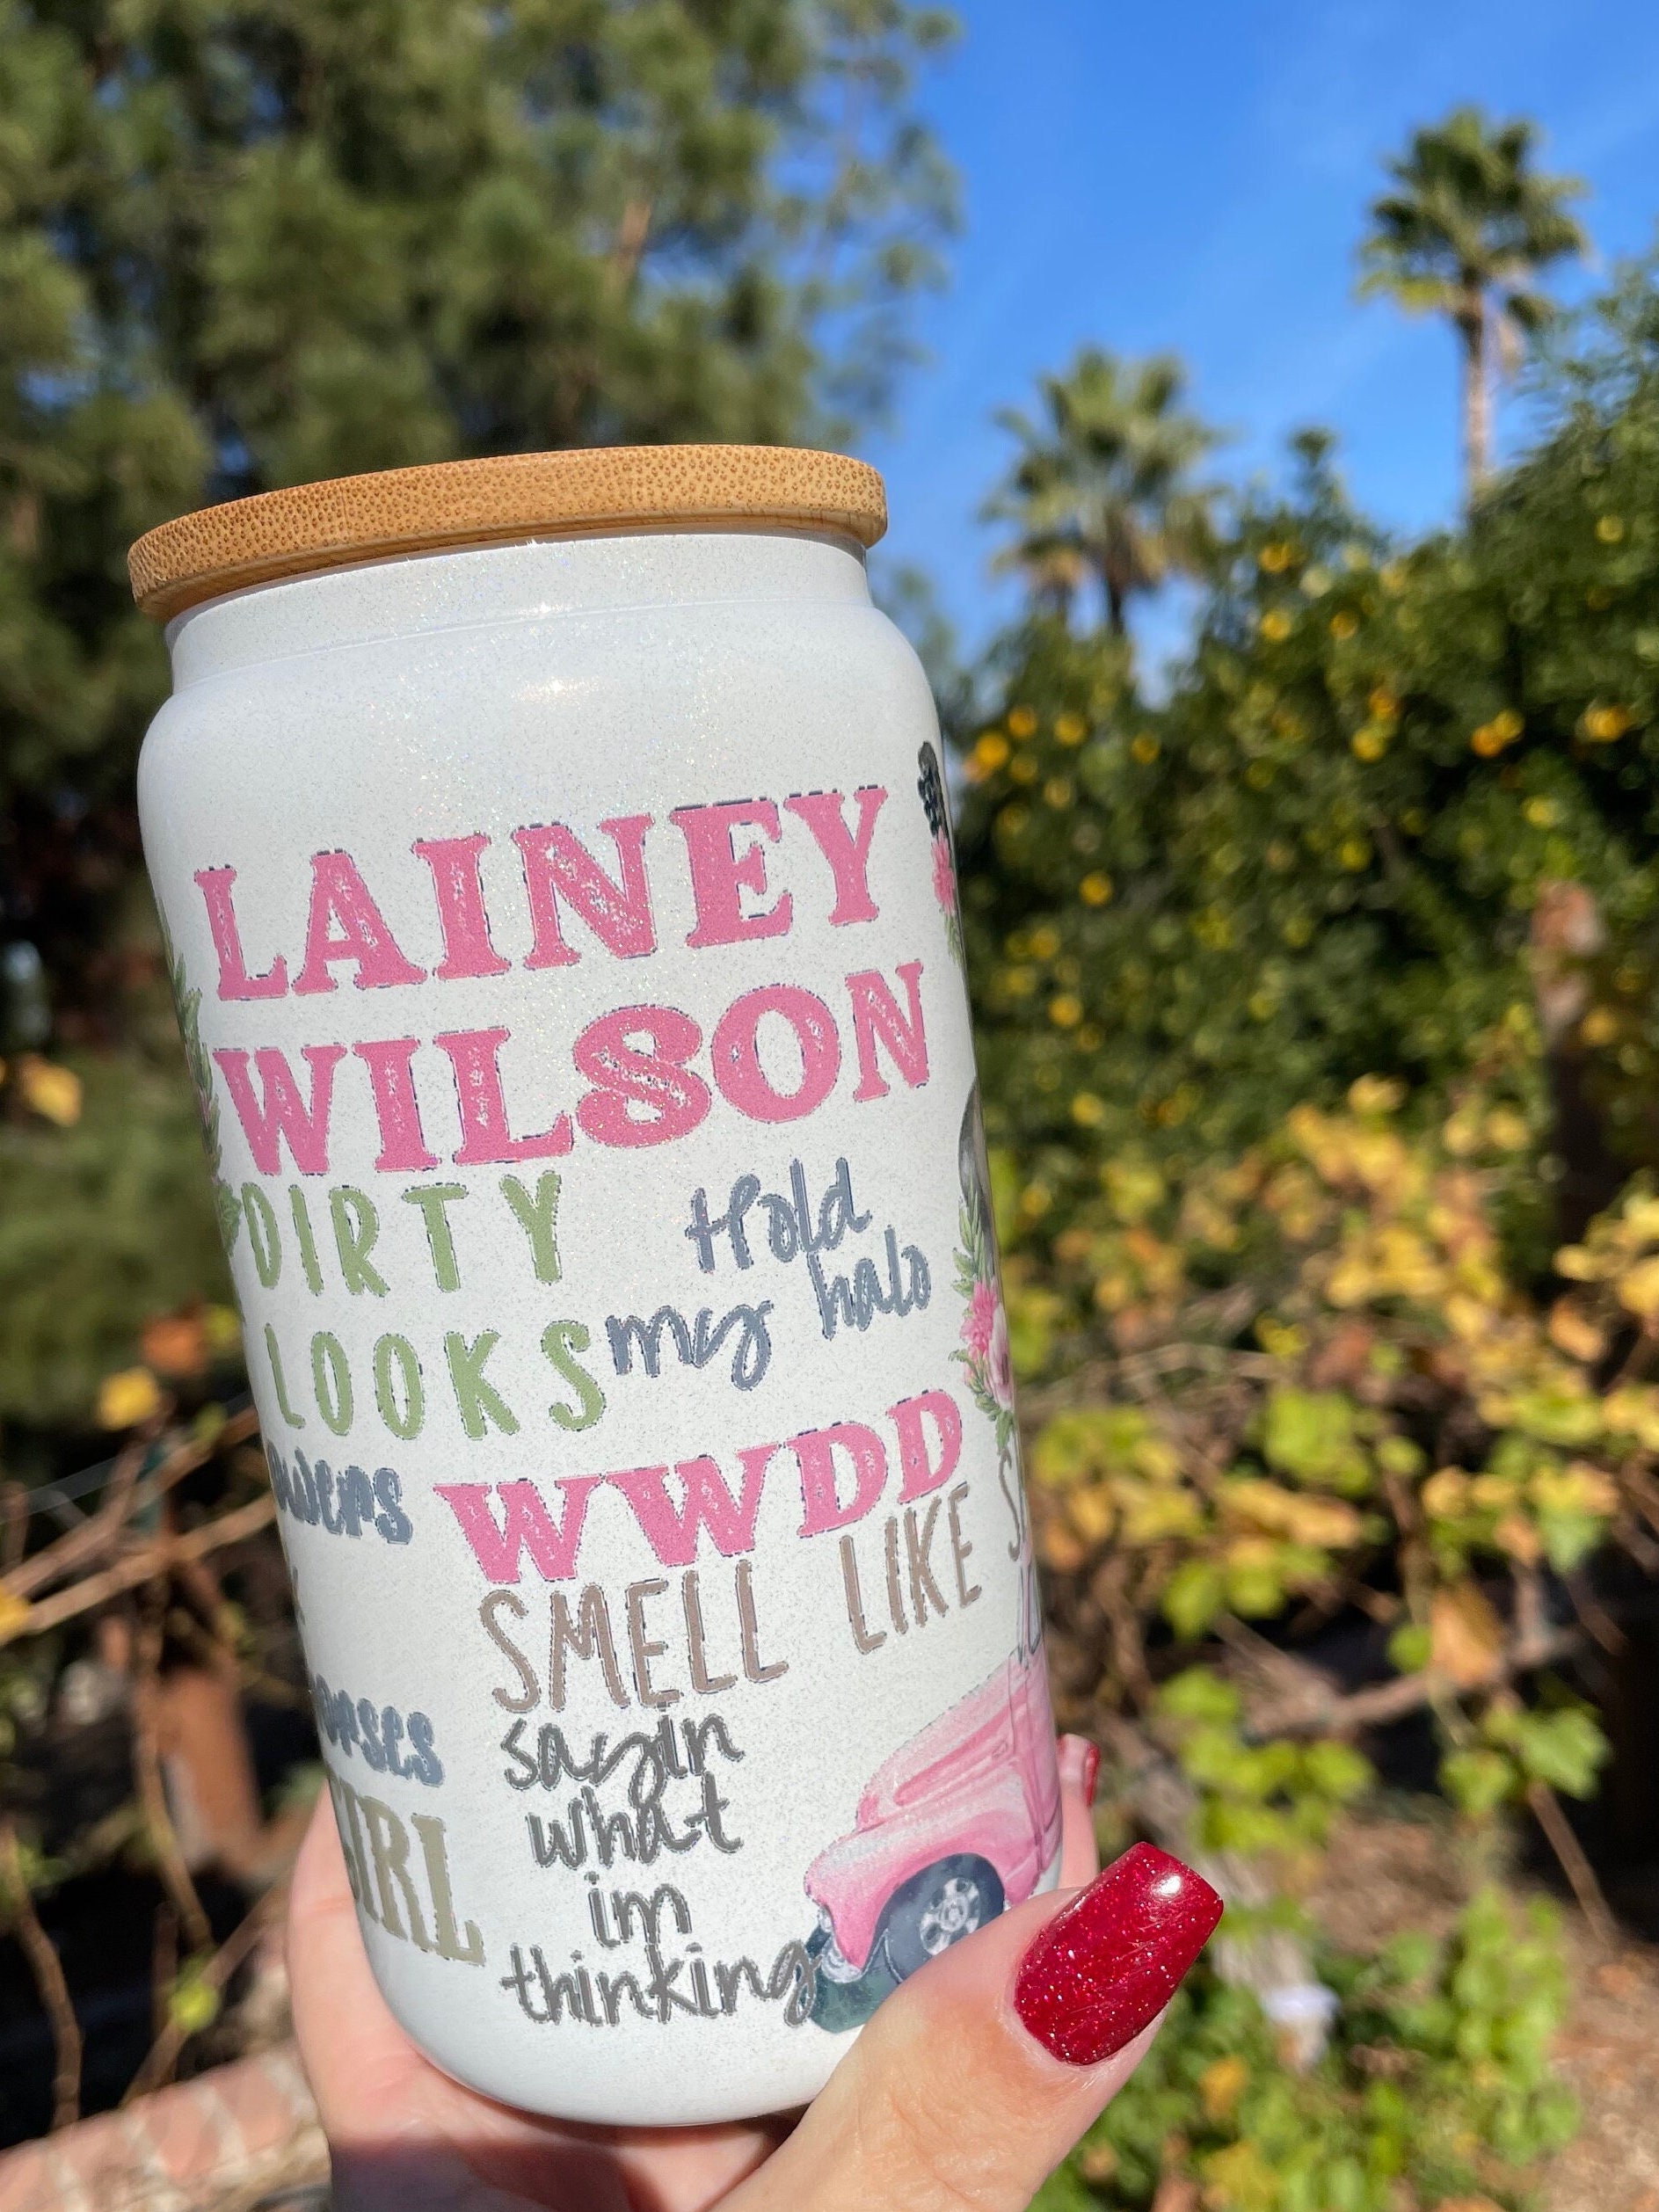 We're ready for the Lainey Wilson + Stanley collab! Have your cup sent